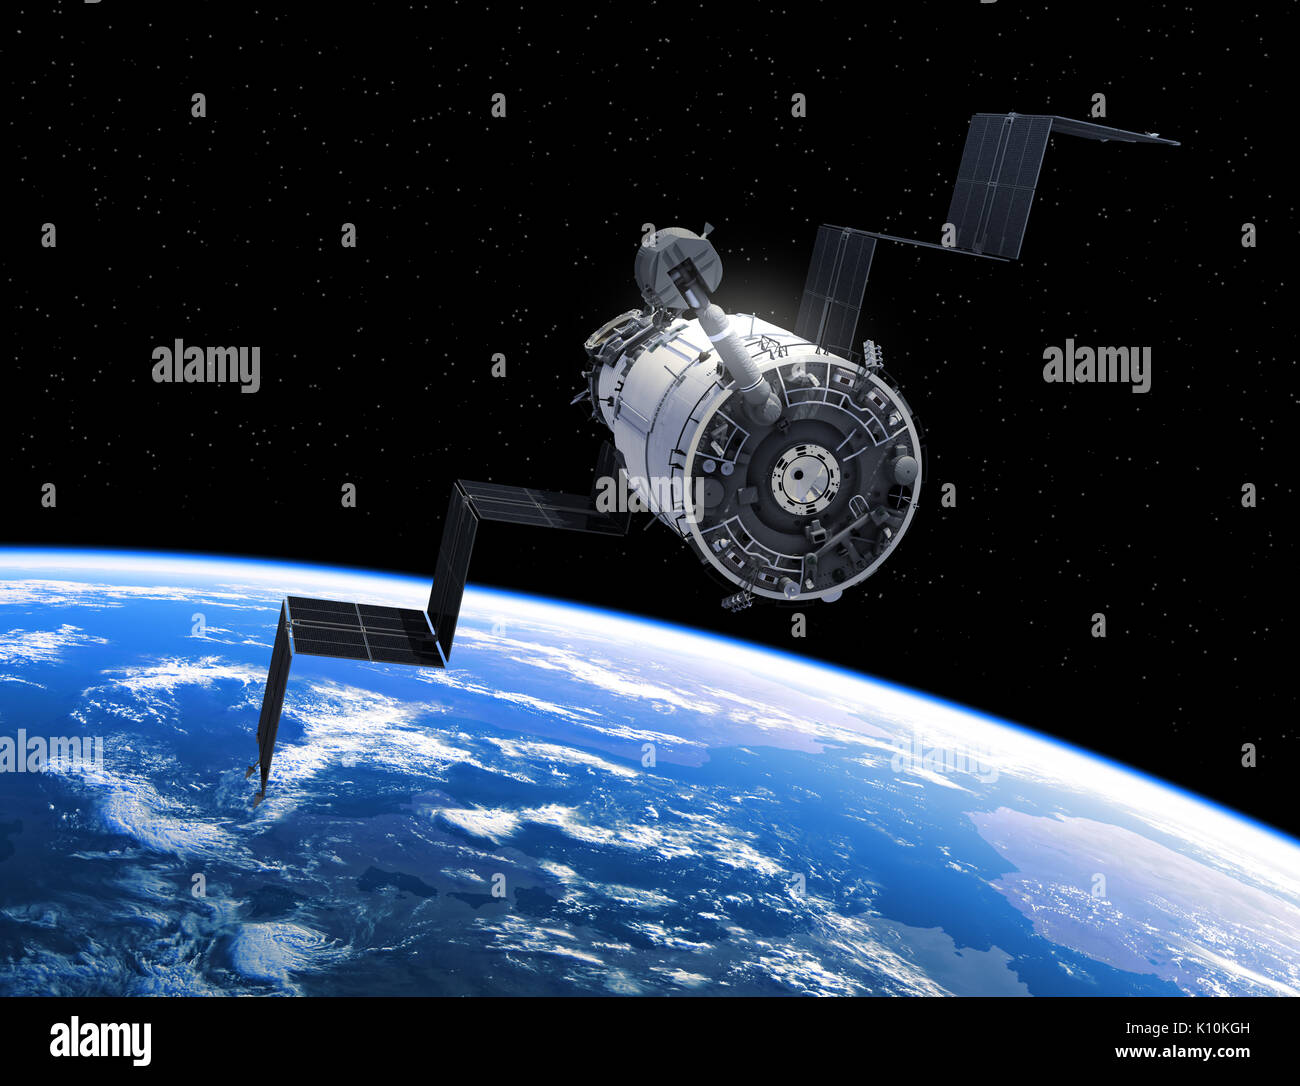 Flight Of Space Station In Outer Space. 3D Illustration. Stock Photo